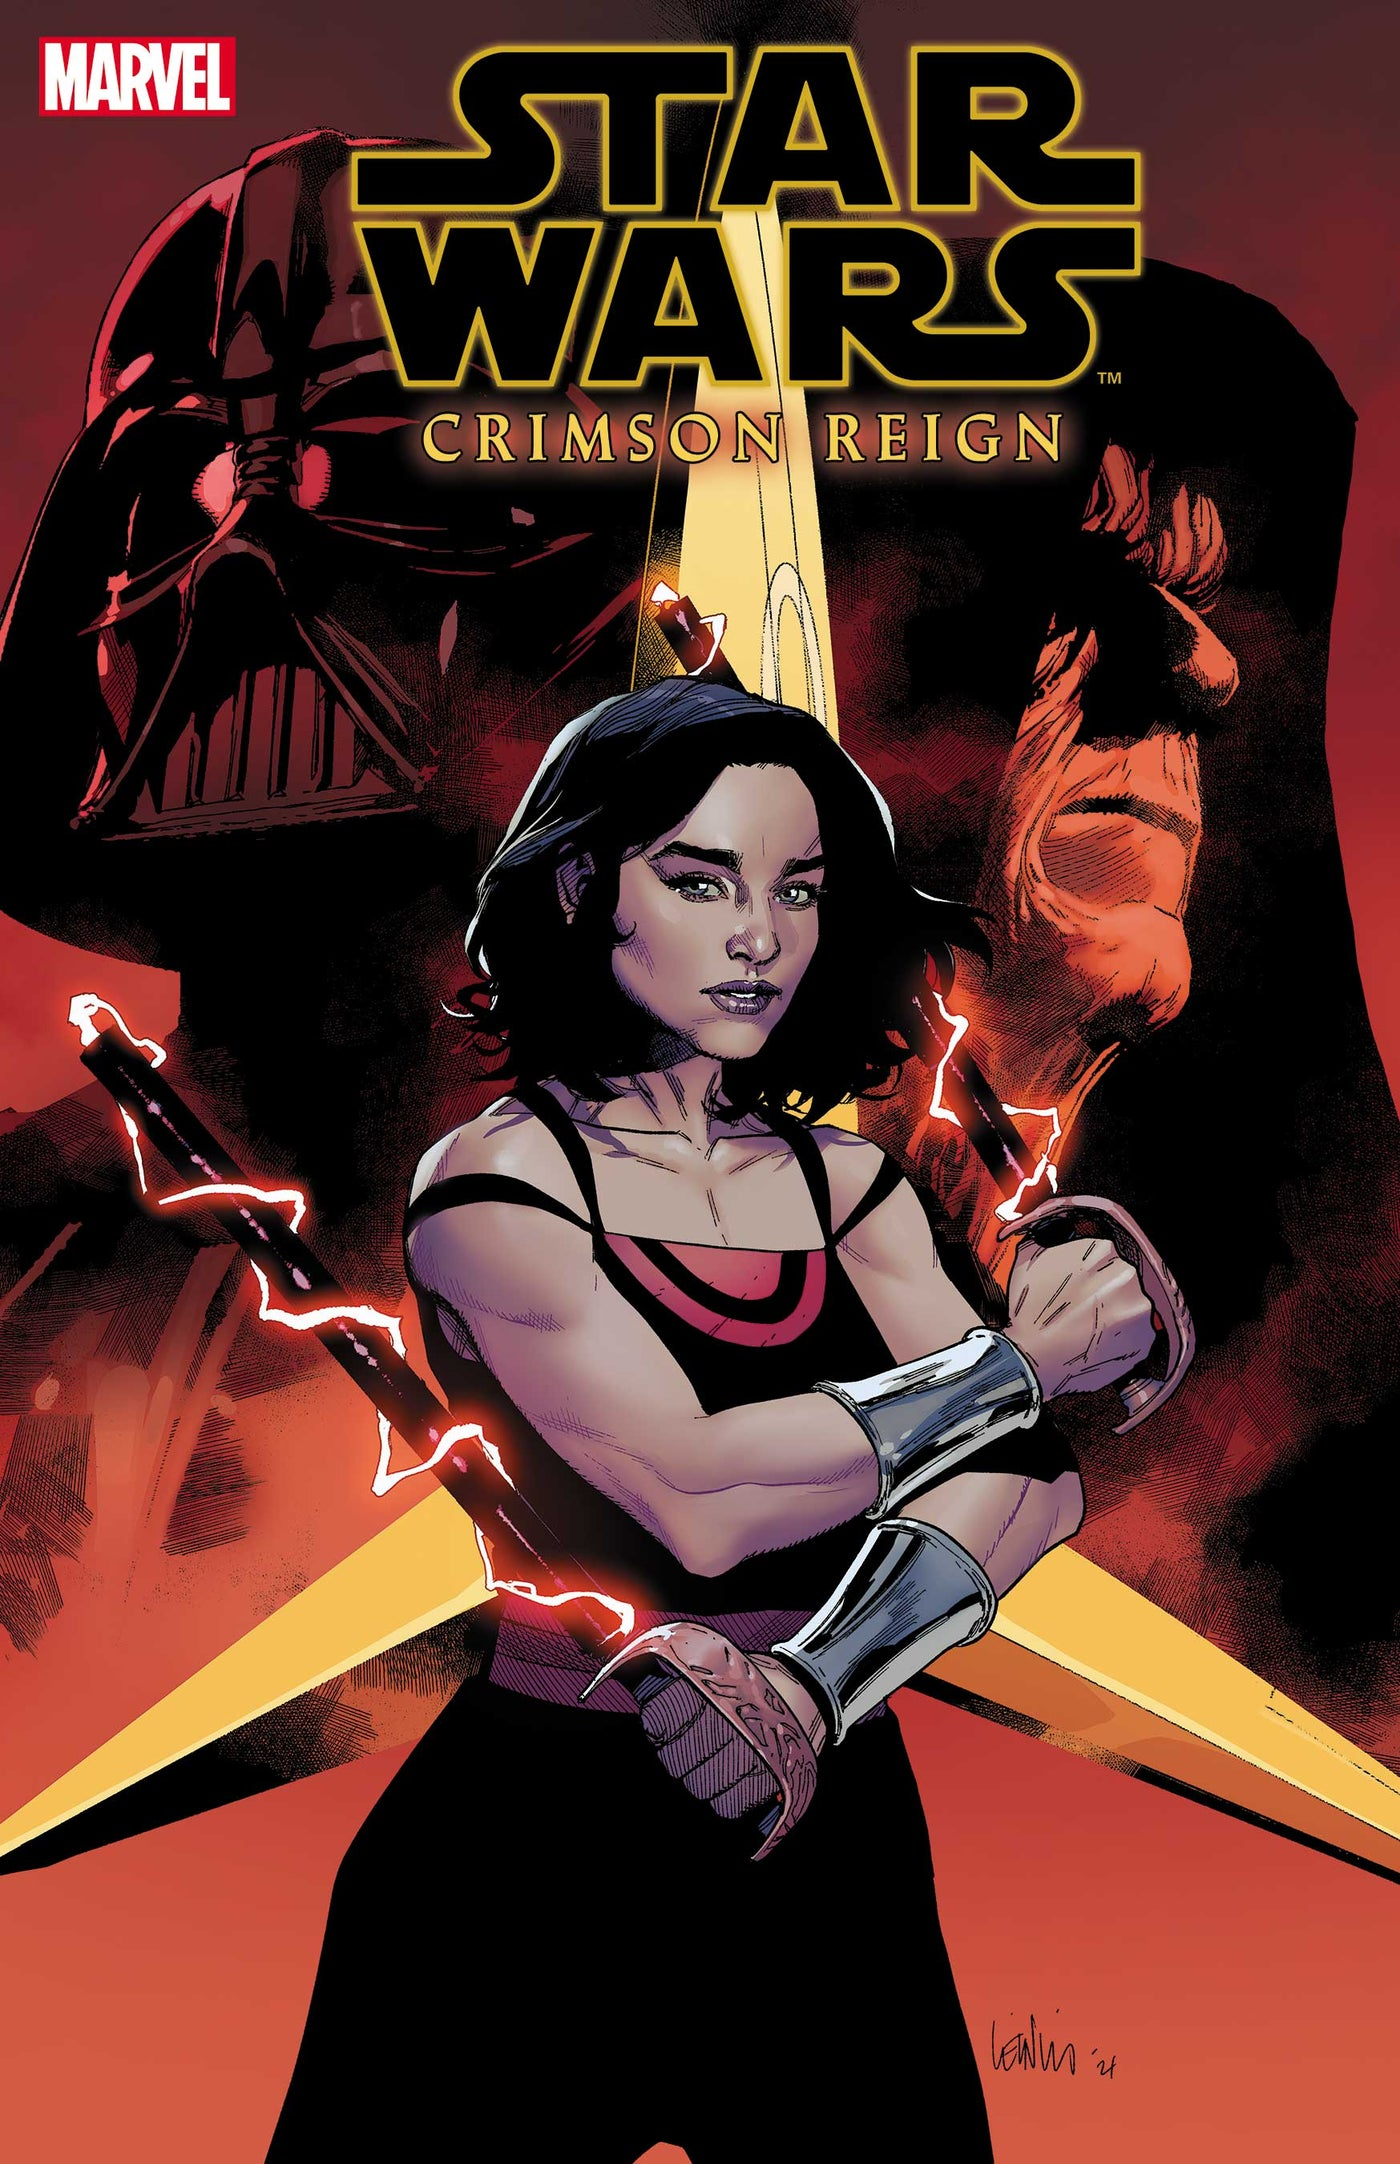 Star Wars: Crimson Reign #1 cover by Leinil Francis Yu. (Image: Marvel/Lucasfilm)